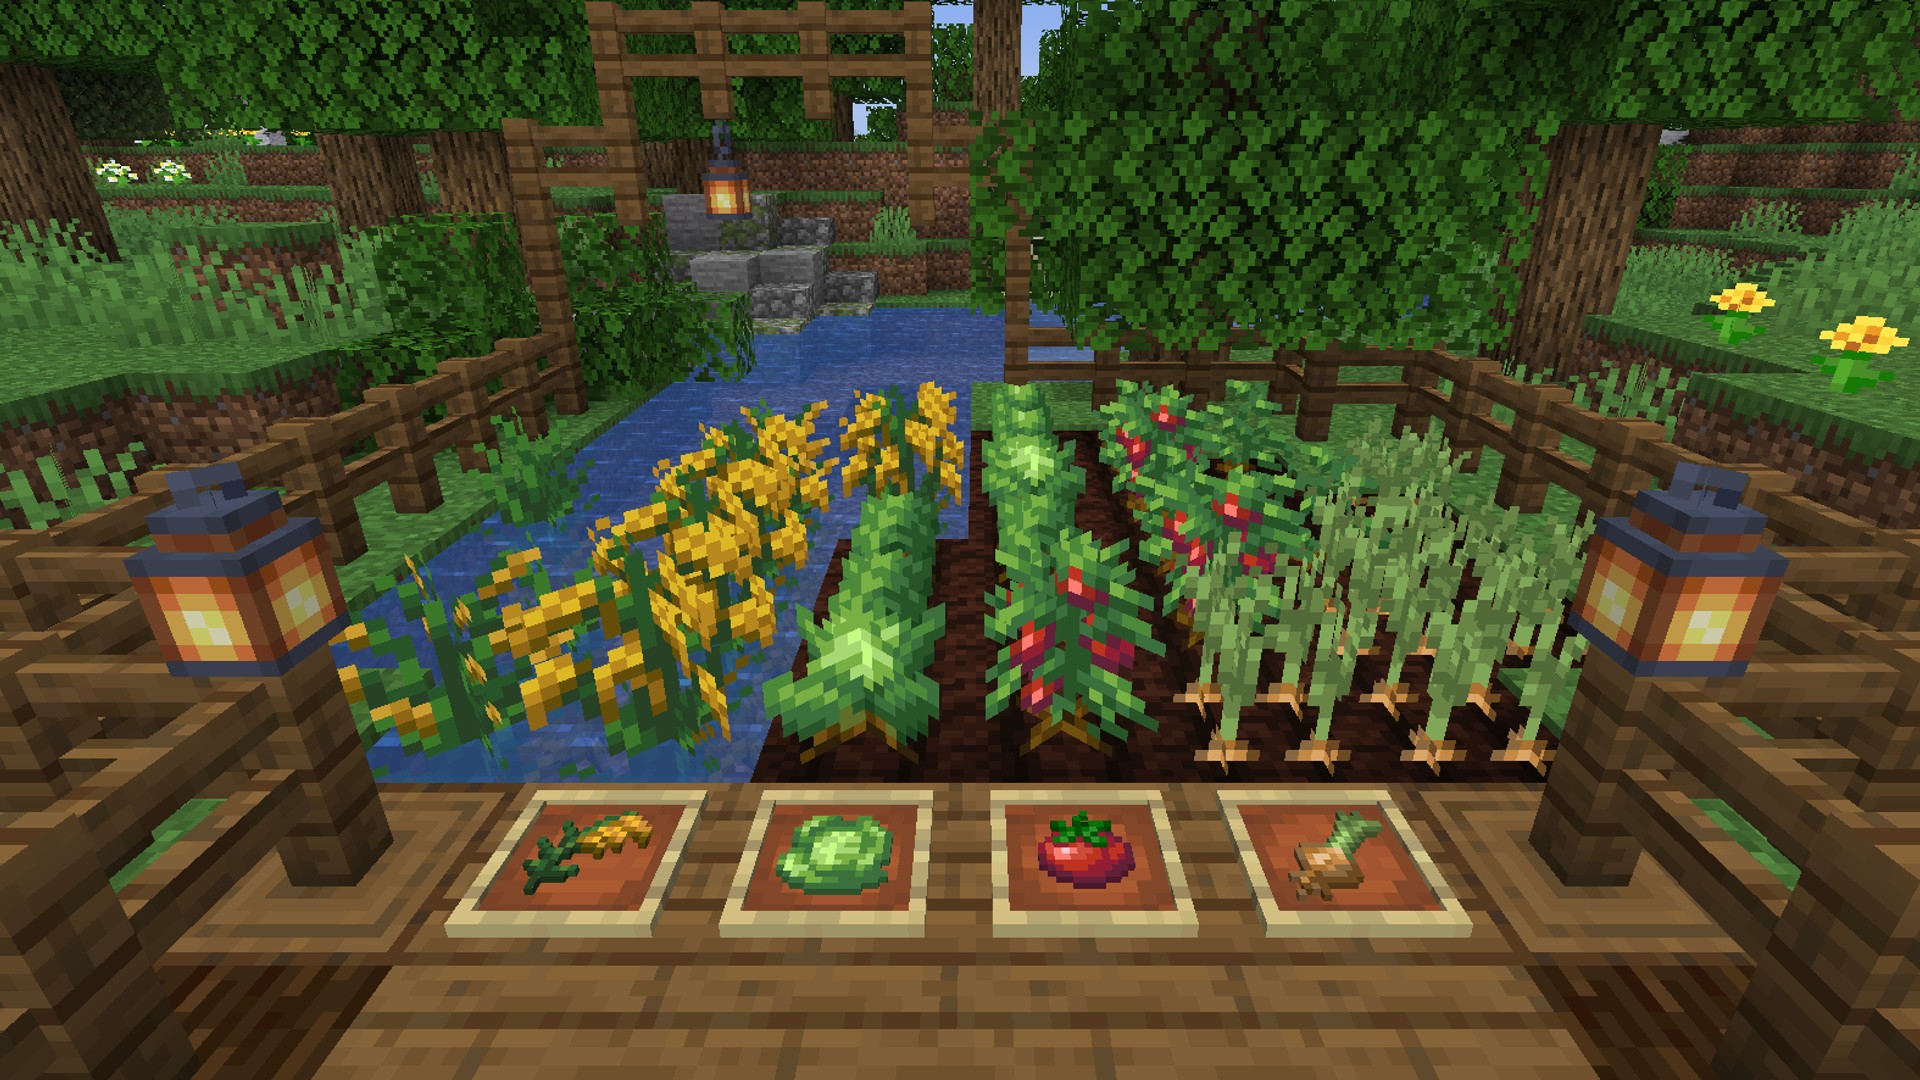 Four new crops in Farmer's Delight, one of the best Minecraft mods.